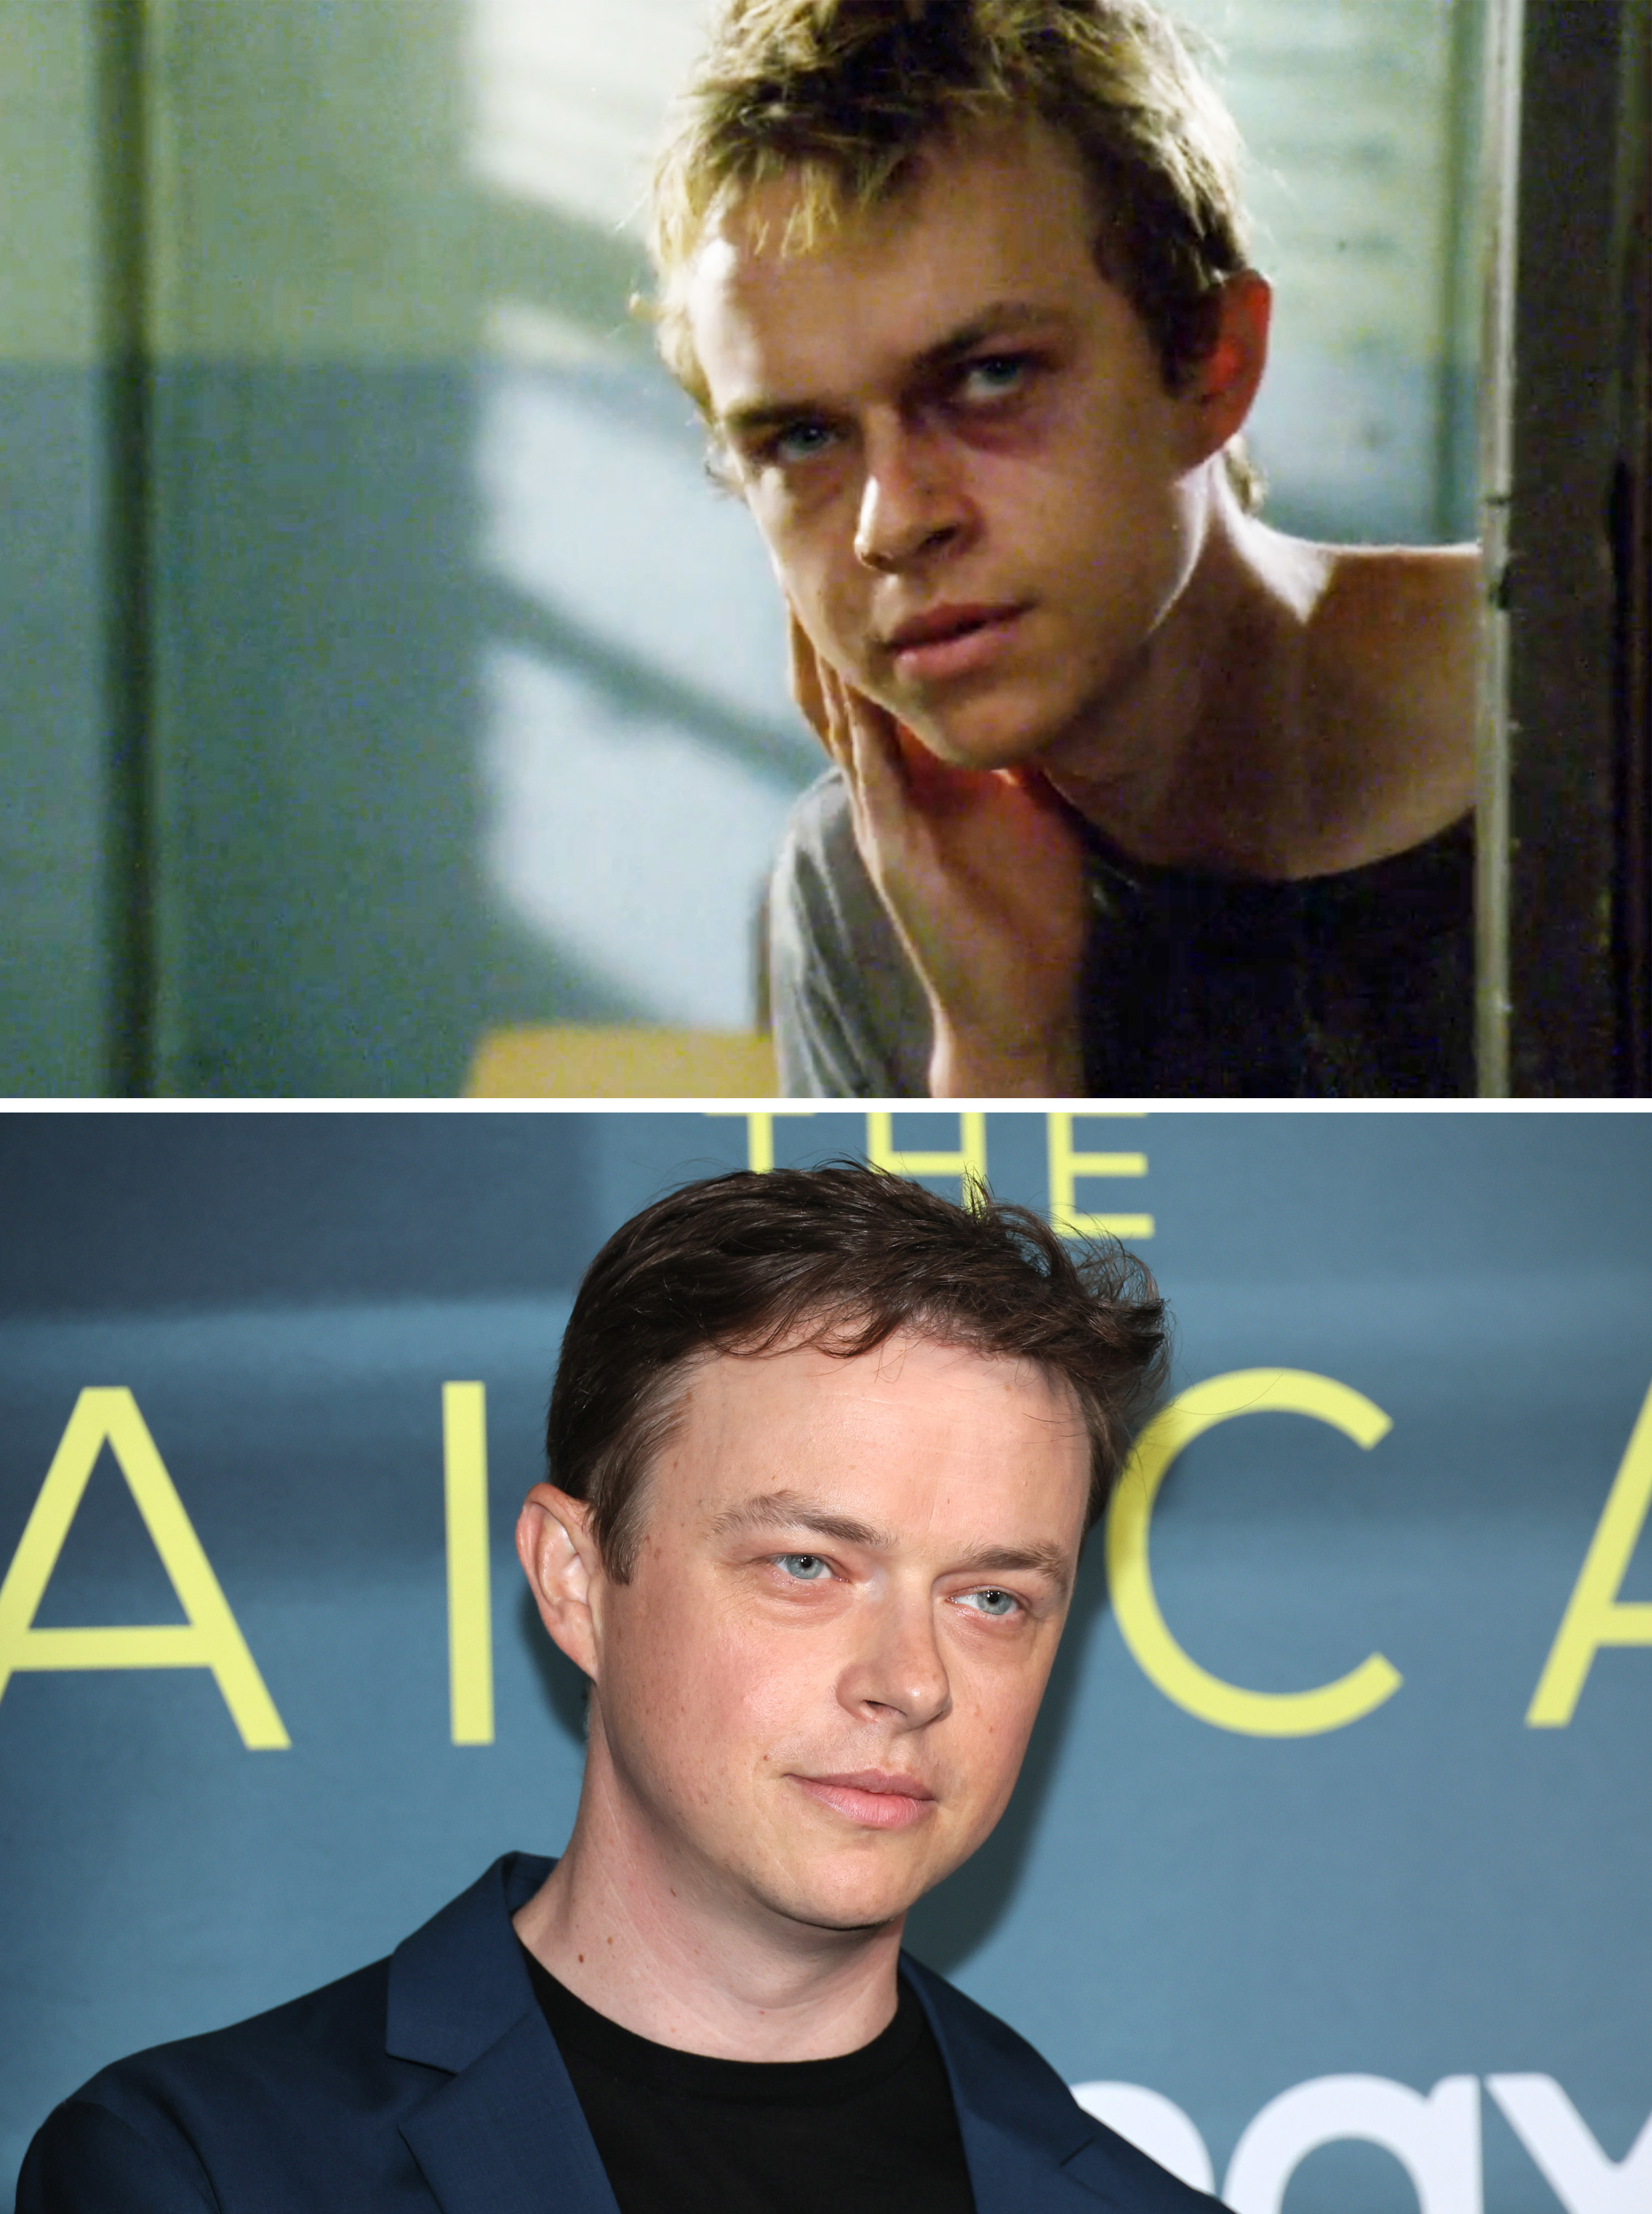 Dane in a scene from the movie and in a close-up at a media event